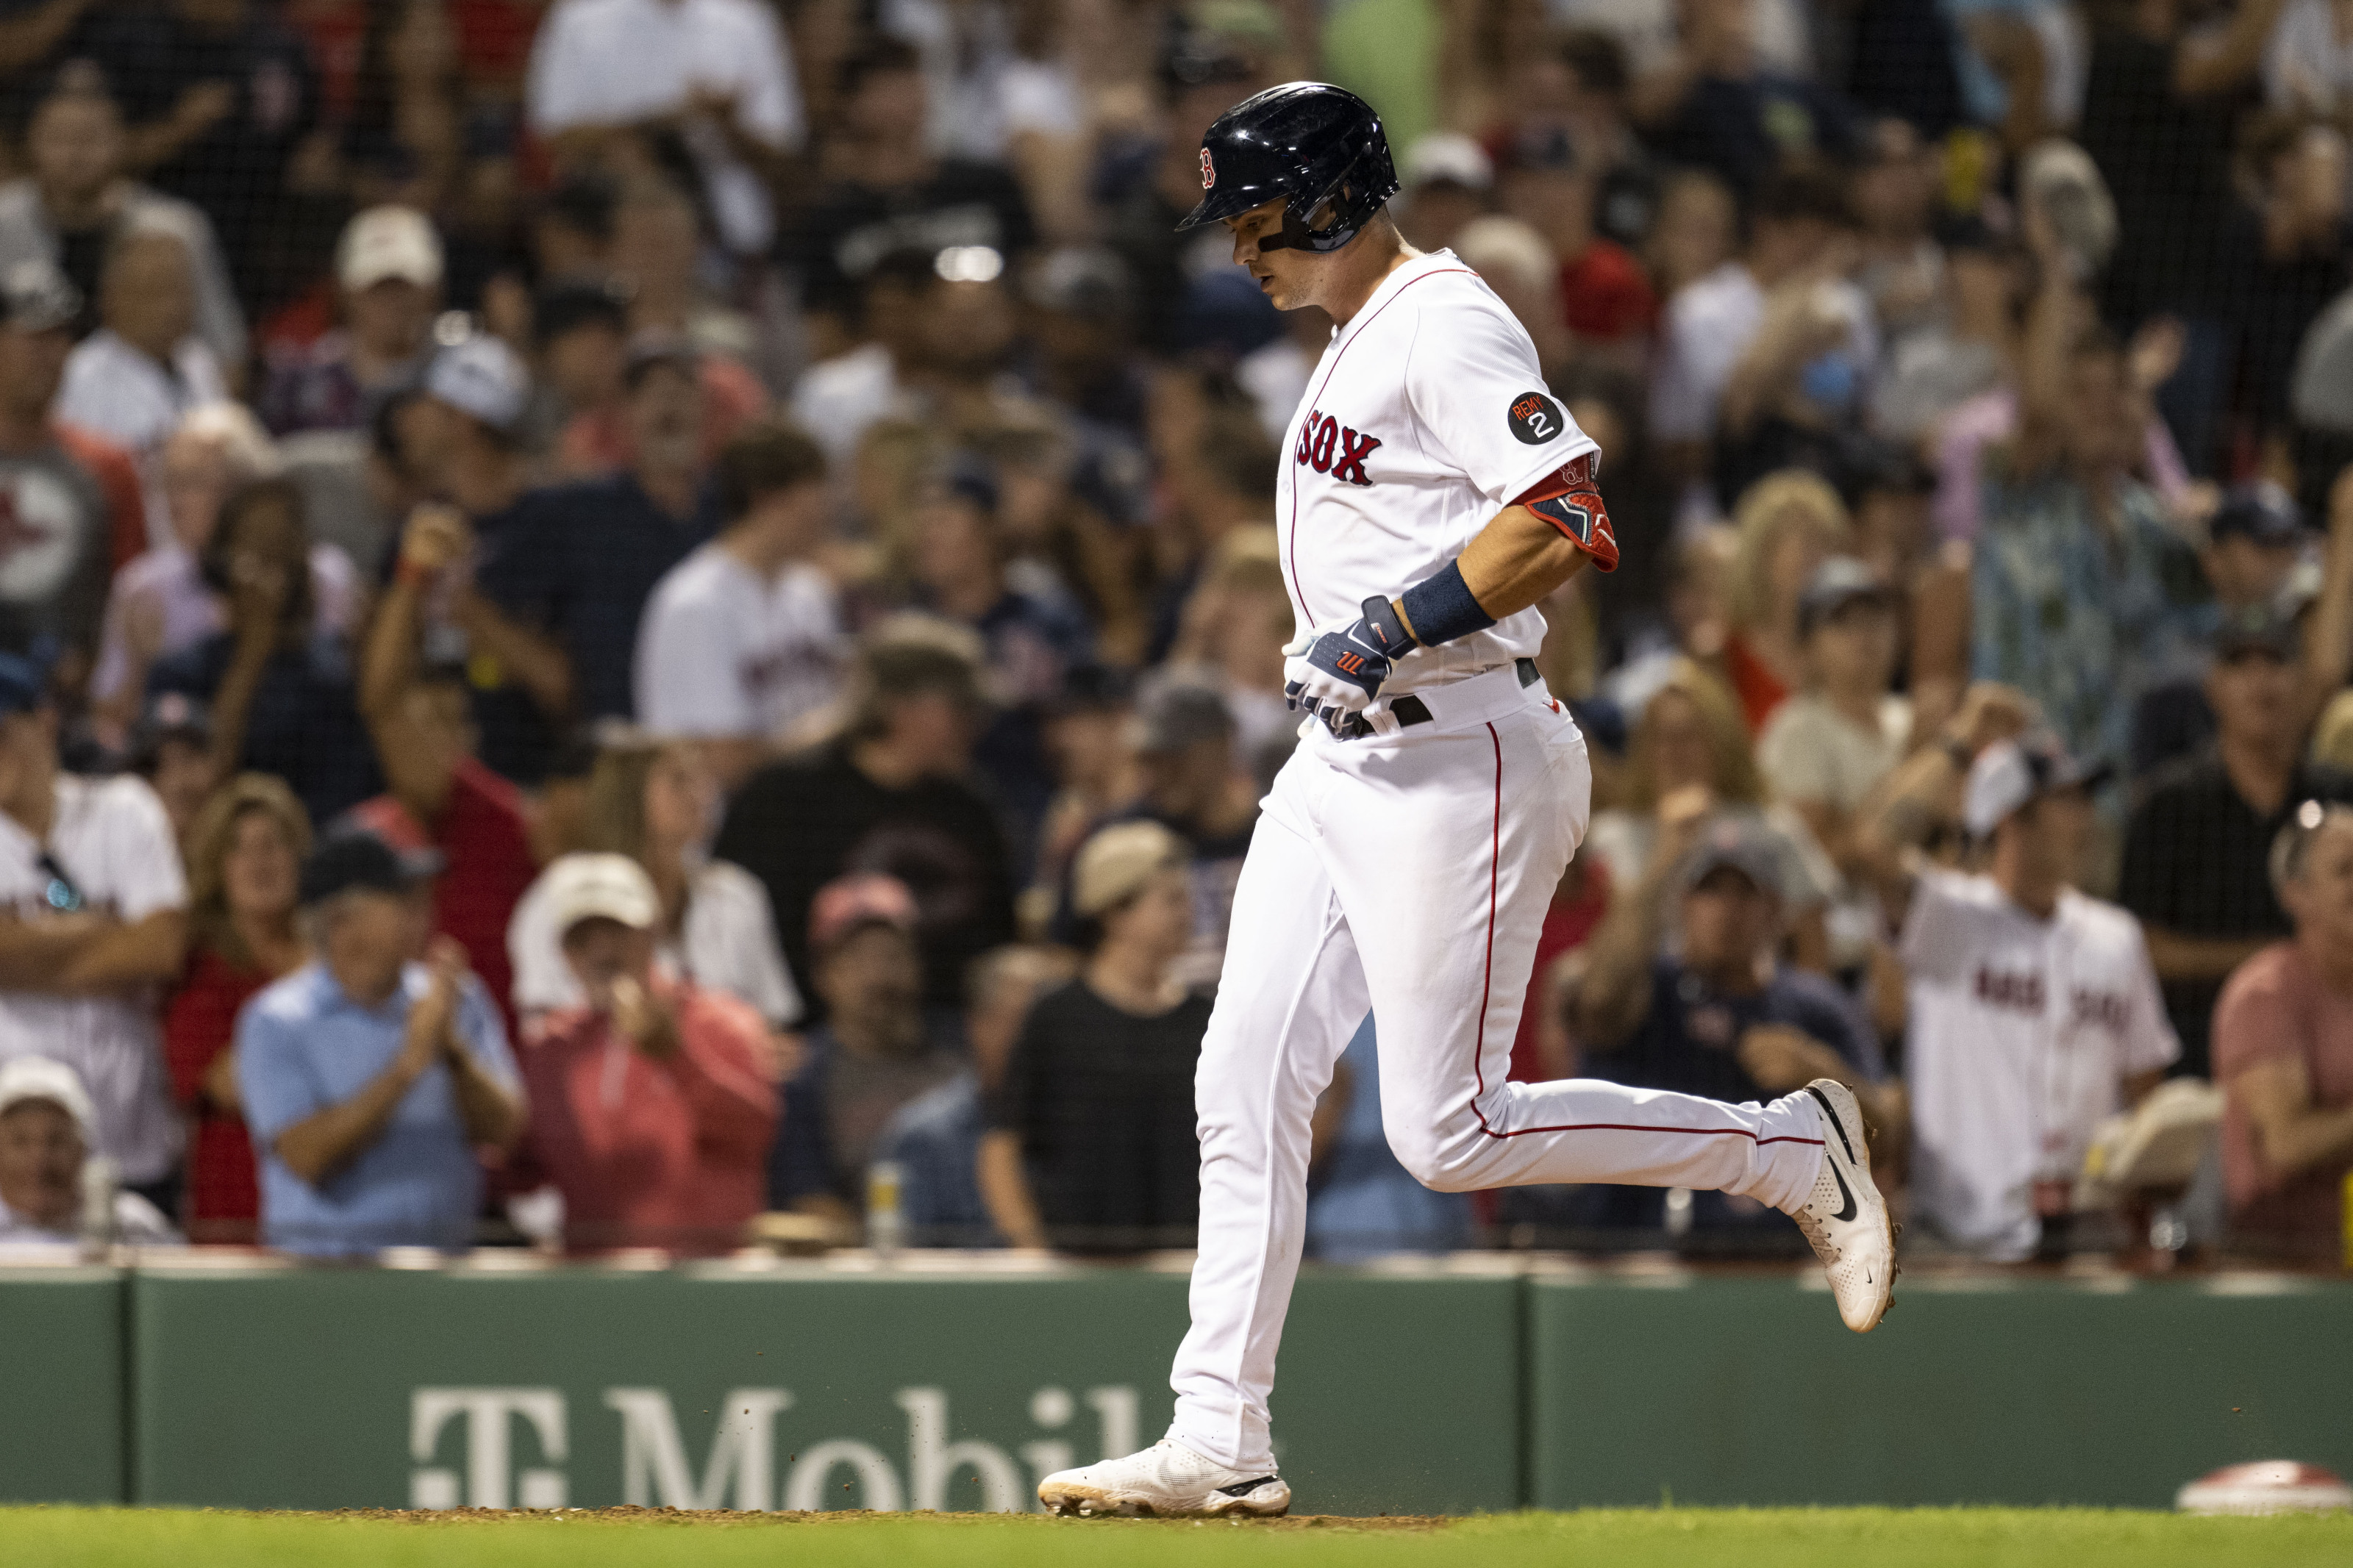 Boston Red Sox Roster: Bobby Dalbec is earning his playing time